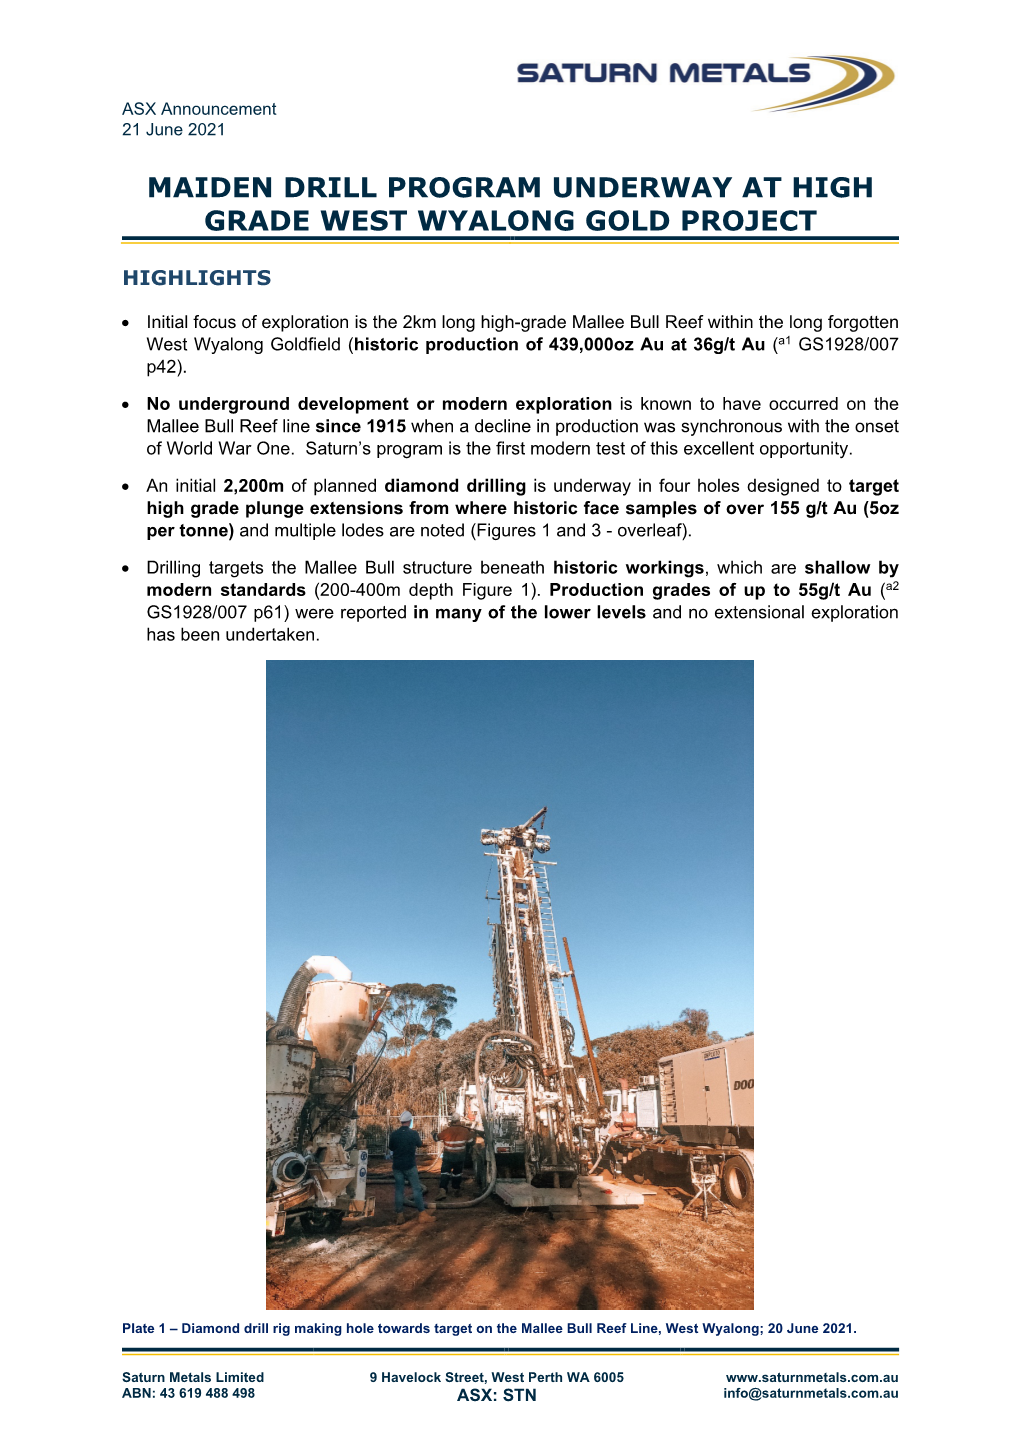 Maiden Drill Program Underway at High Grade West Wyalong Gold Project